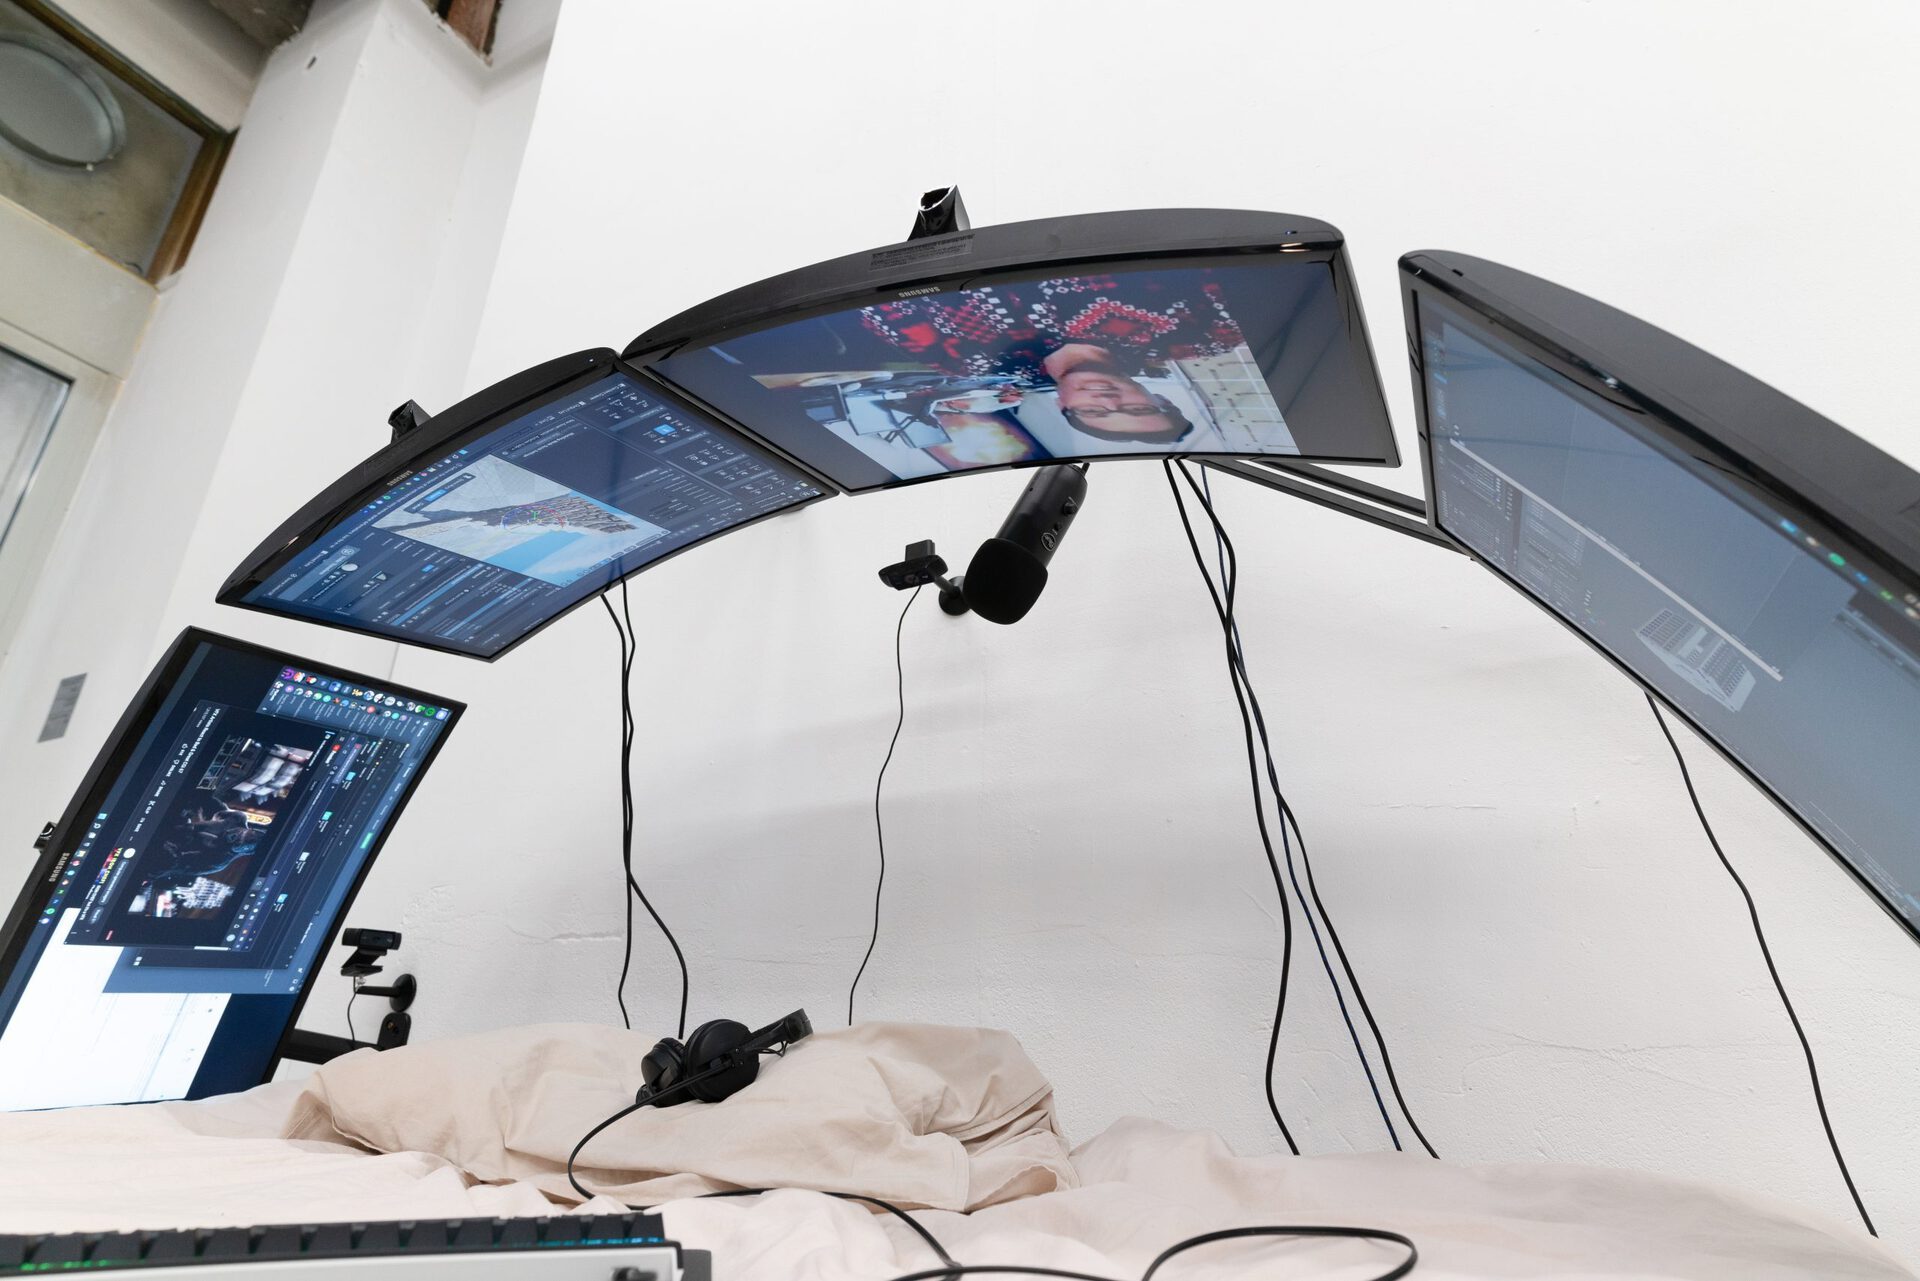 Filip Kostic, Bed PC, 2021, Custom built water cooled computer built into the frame of a bed, bed size variable, 4 curved monitors, cables mounted to wall, keyboard, streaming microphone mounted to wall, webcams, gaming mouse, peripheral computer (detail)